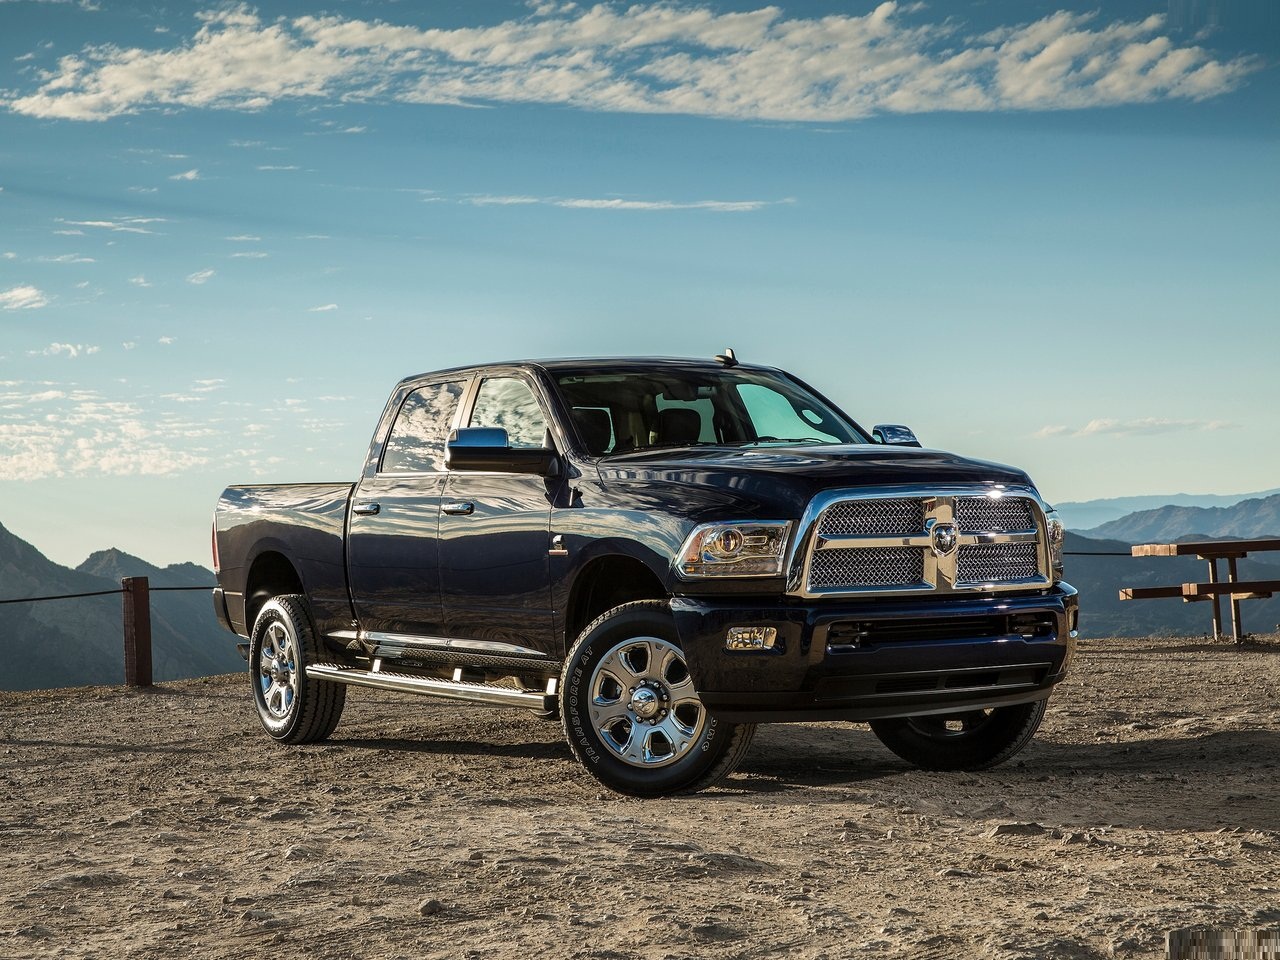 2014 Ram Heavy Duty   Wallpapers Pics Pictures Images Photos